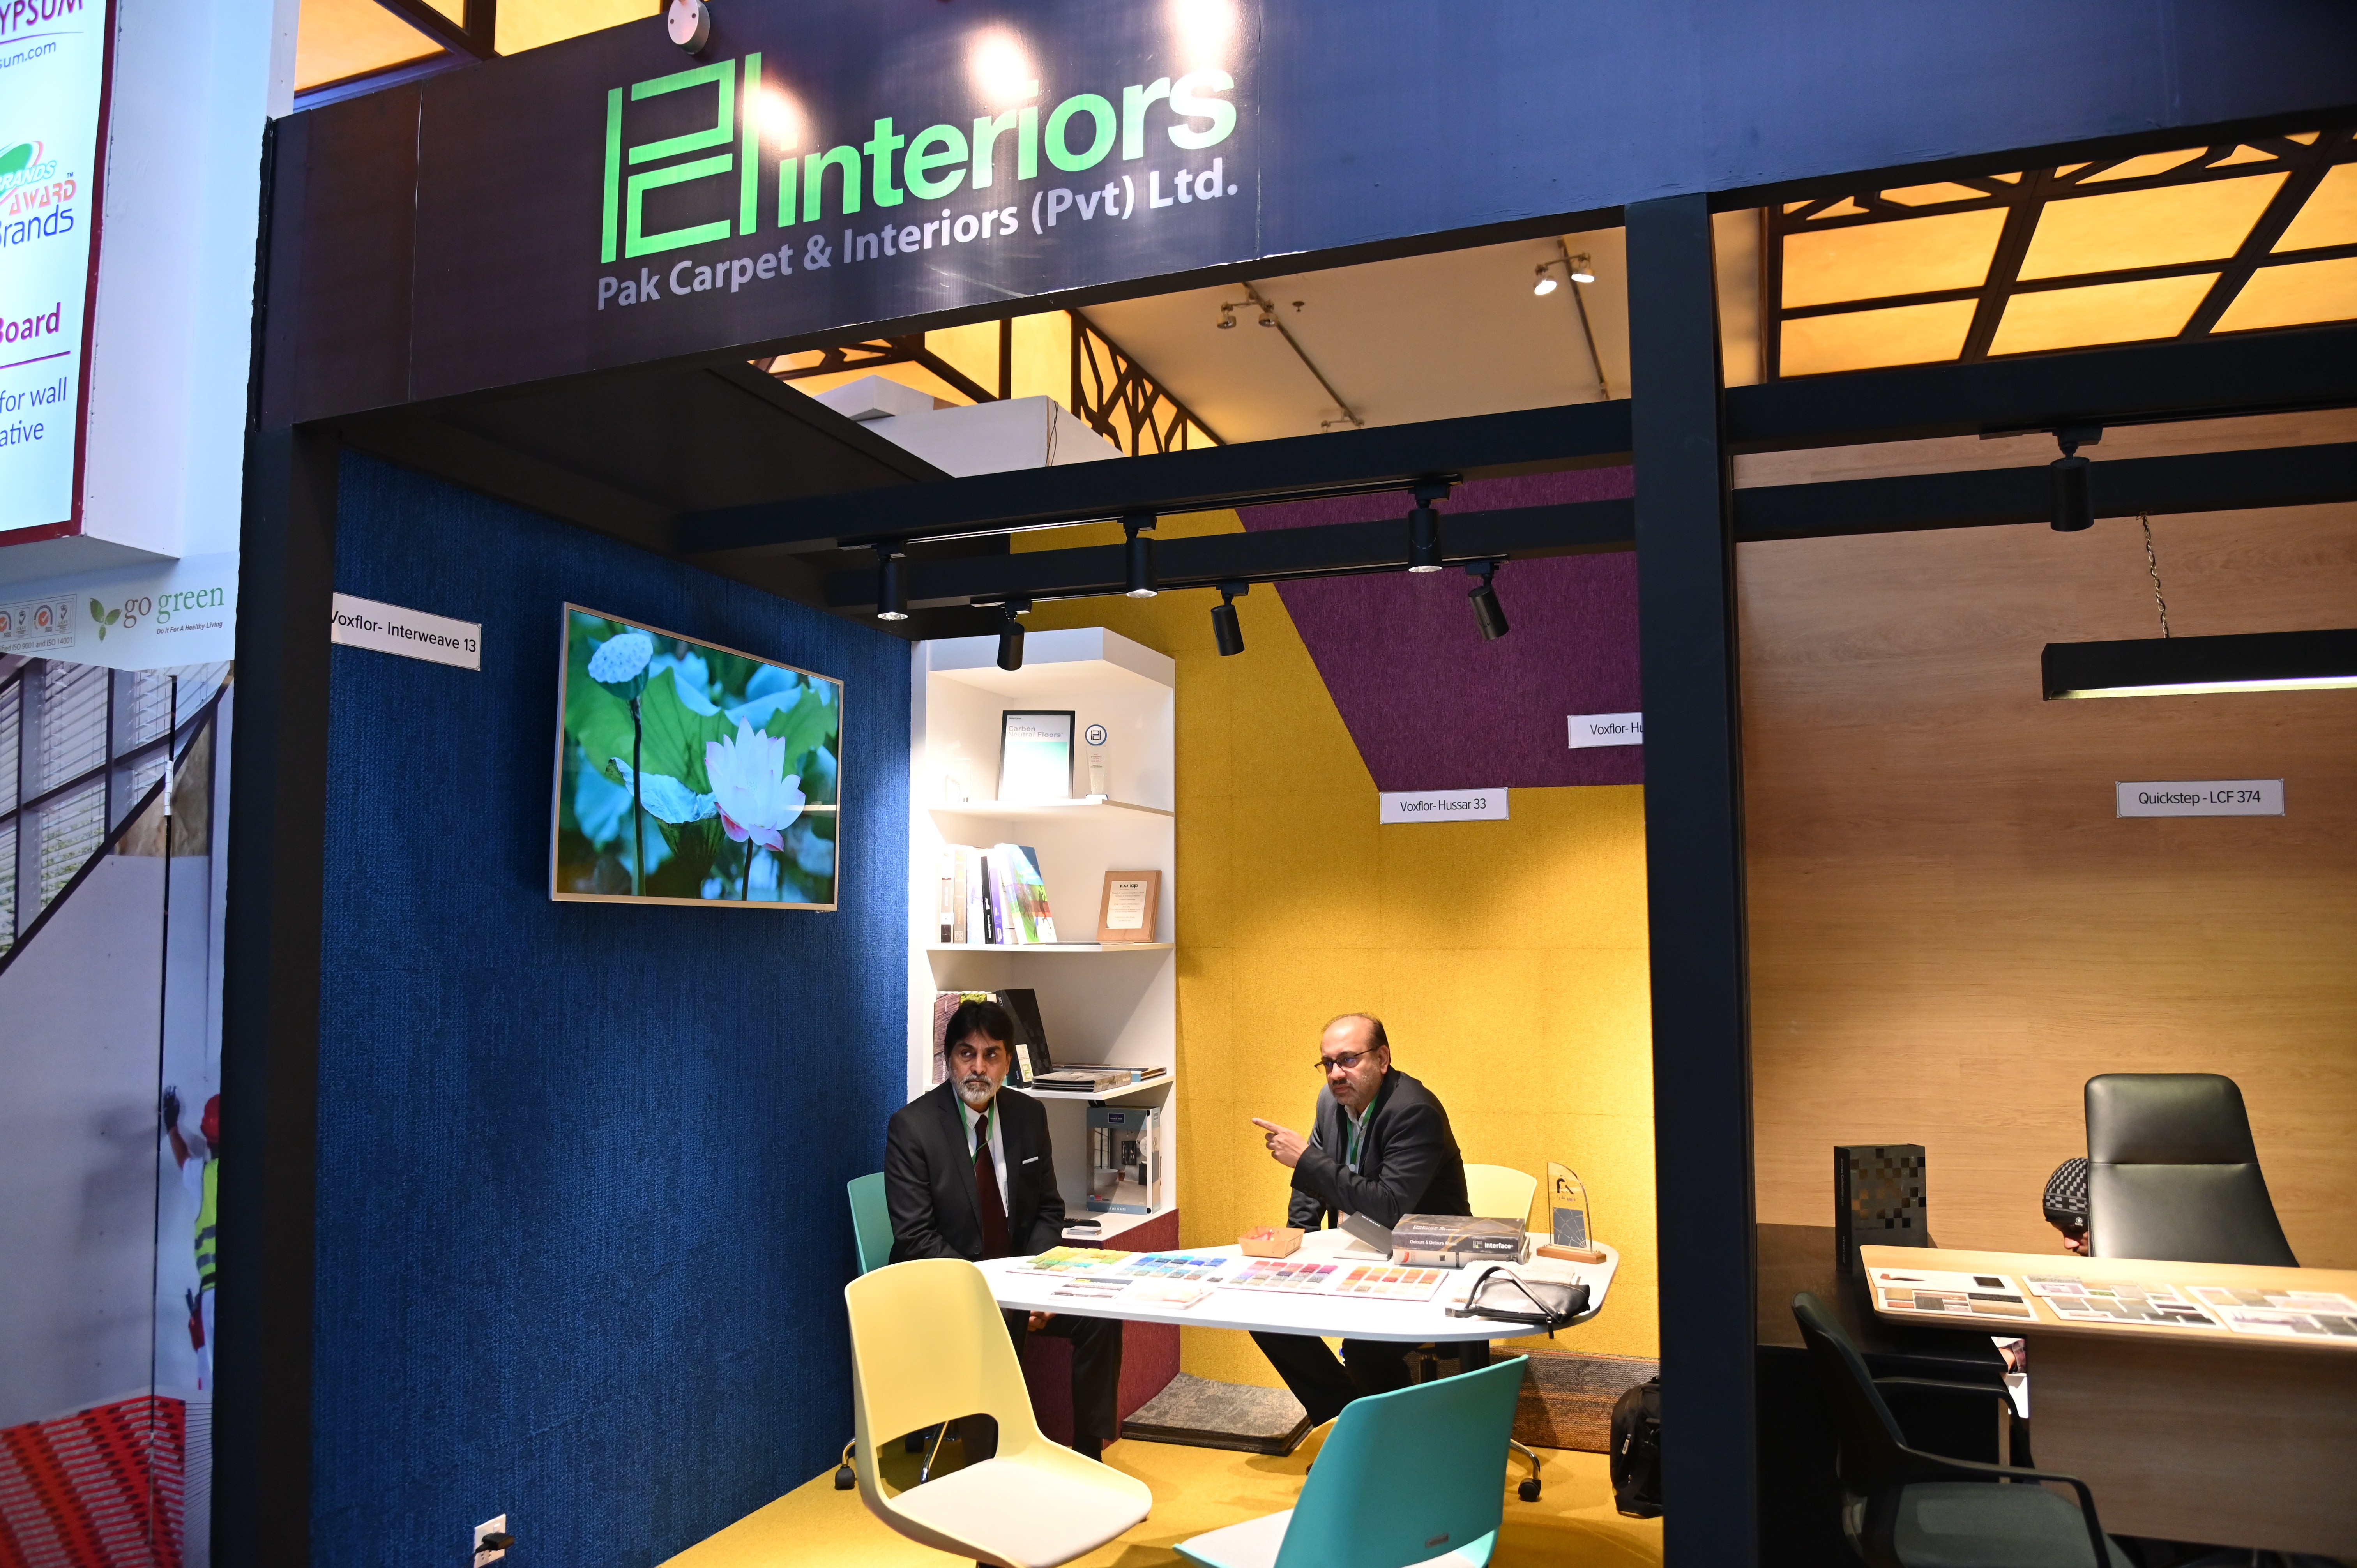 Pak Carpet and Interior (Pvt) Ltd at the building material Exhibition and conference